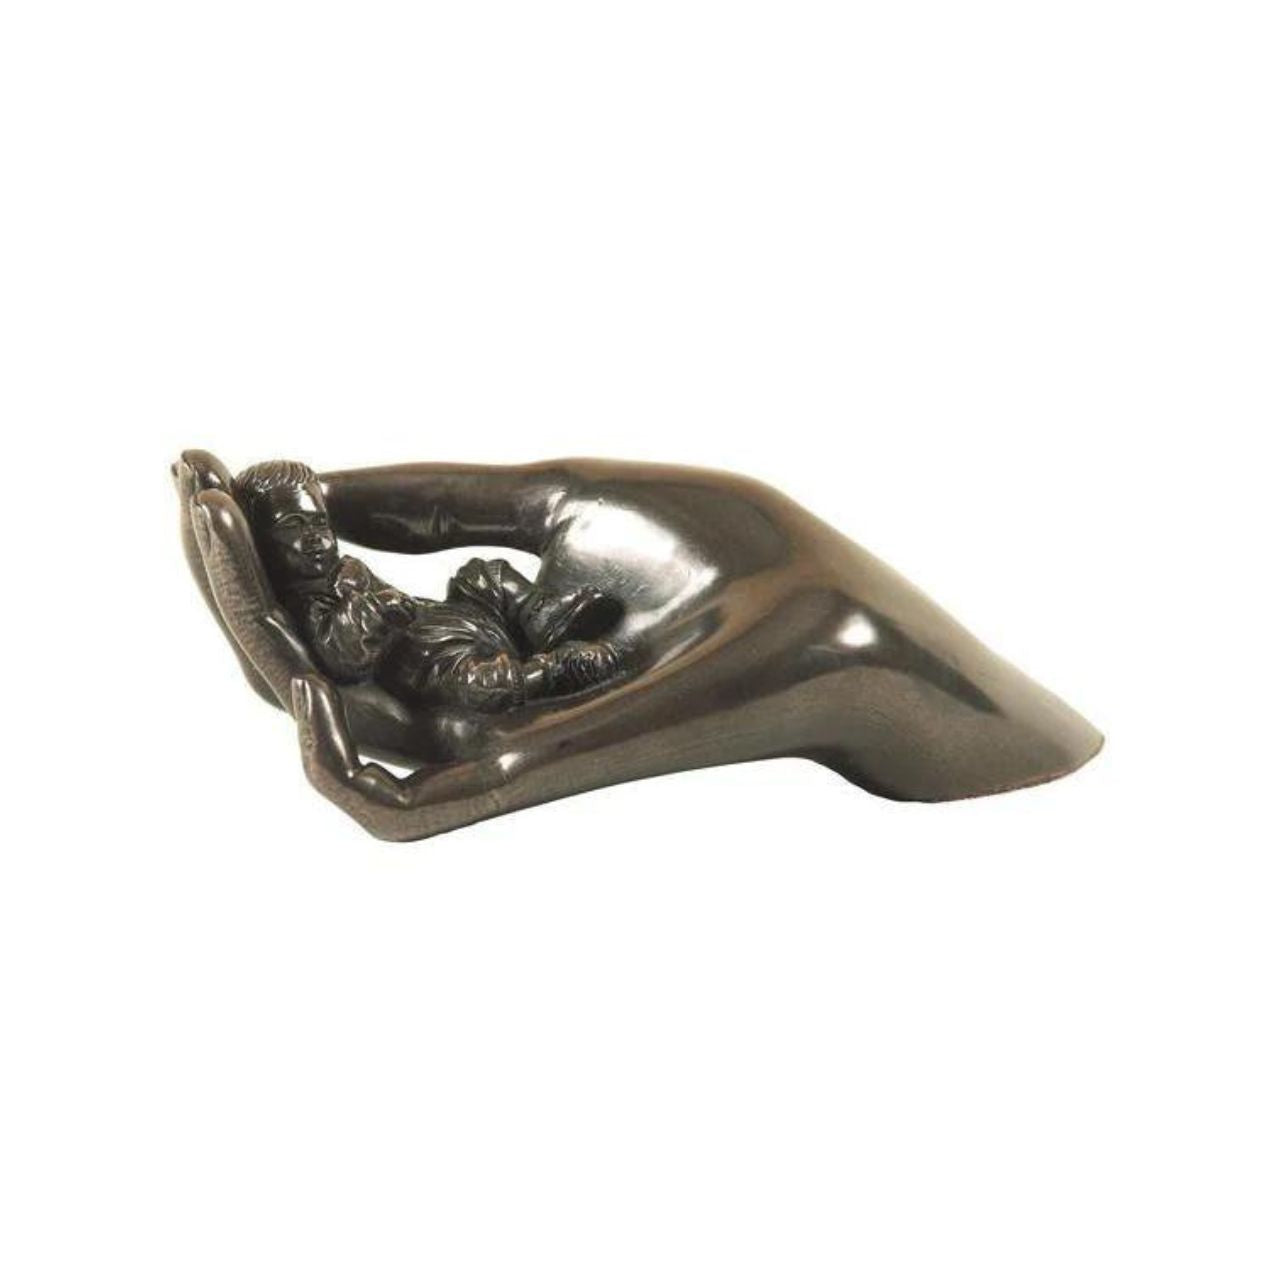 Genesis Caring Baby Boy  Beautifully crafted in cold cast bronze this wonderful baby figurine from the craftsmen of Genesis Fine Arts depicts the sleeping baby boy carefully curled up in a mothers caring hand.